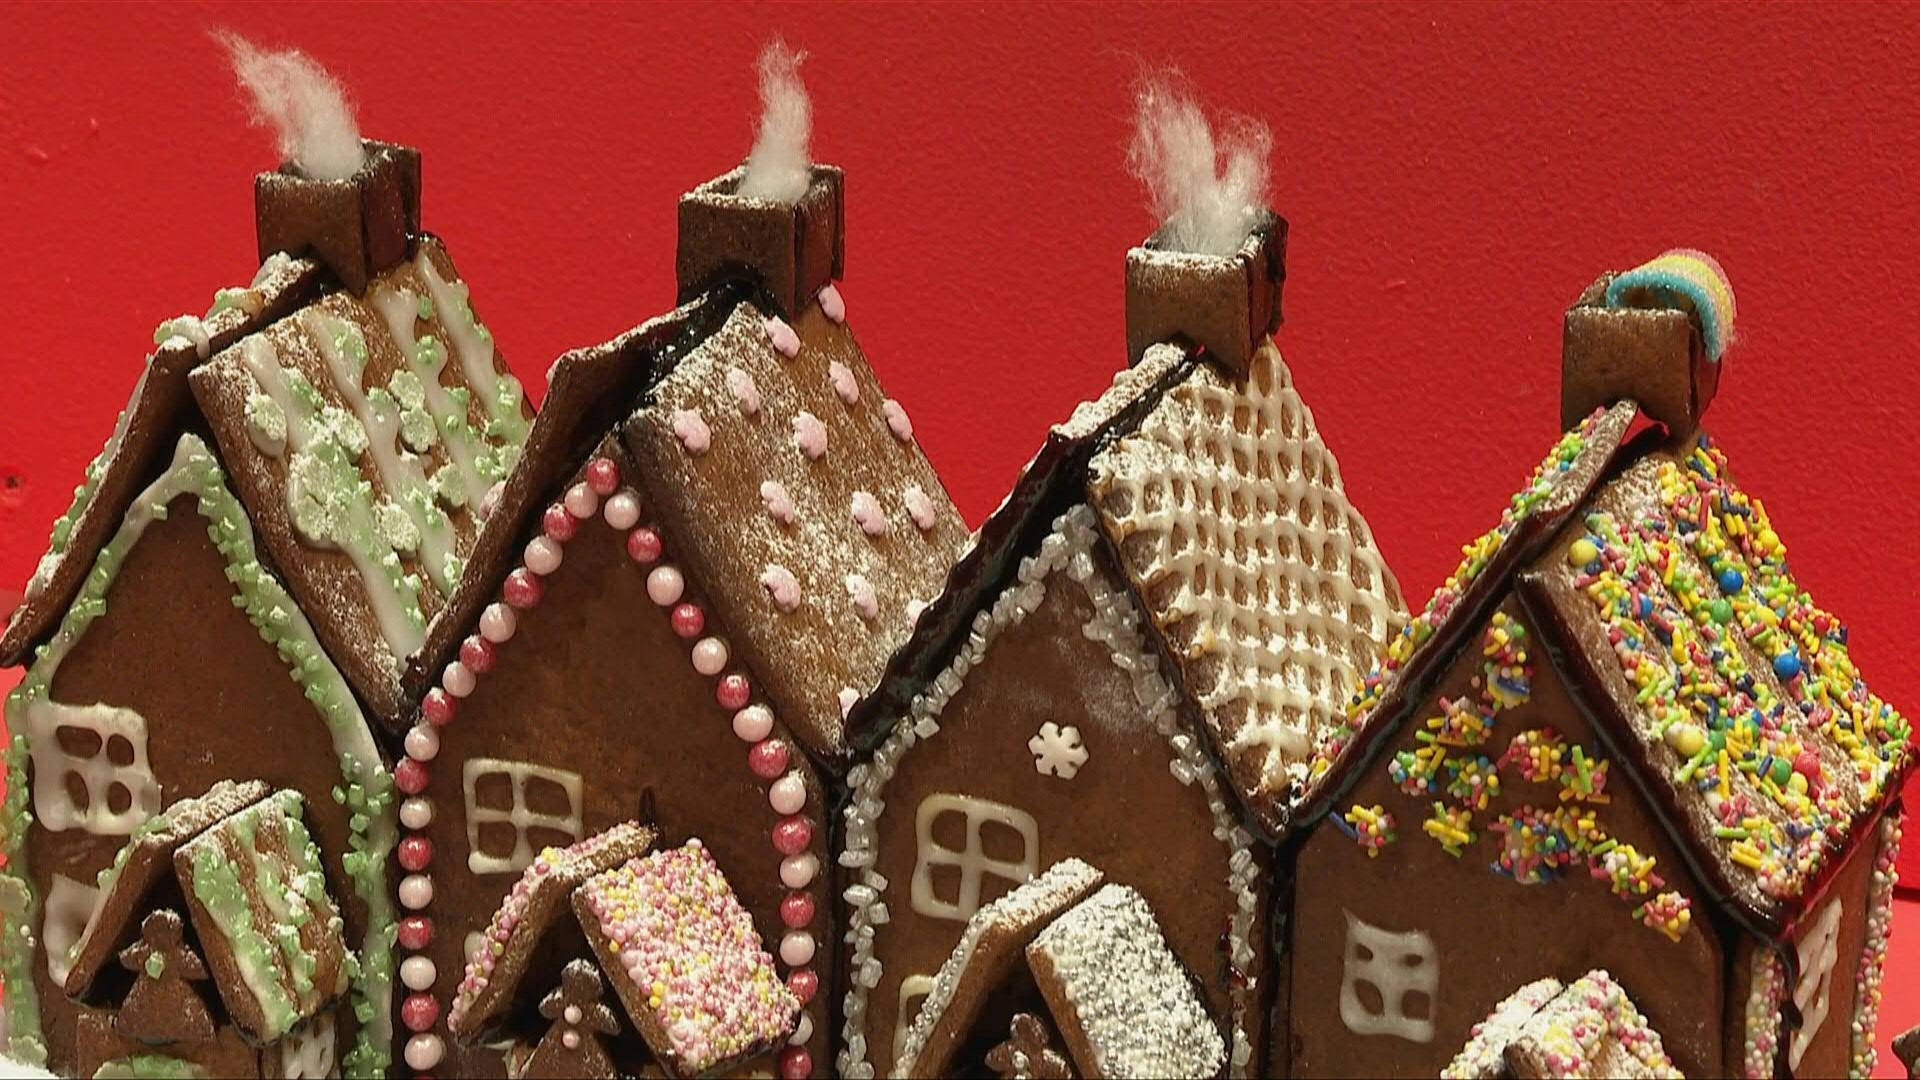 Exquisite Edible Gingerbread House